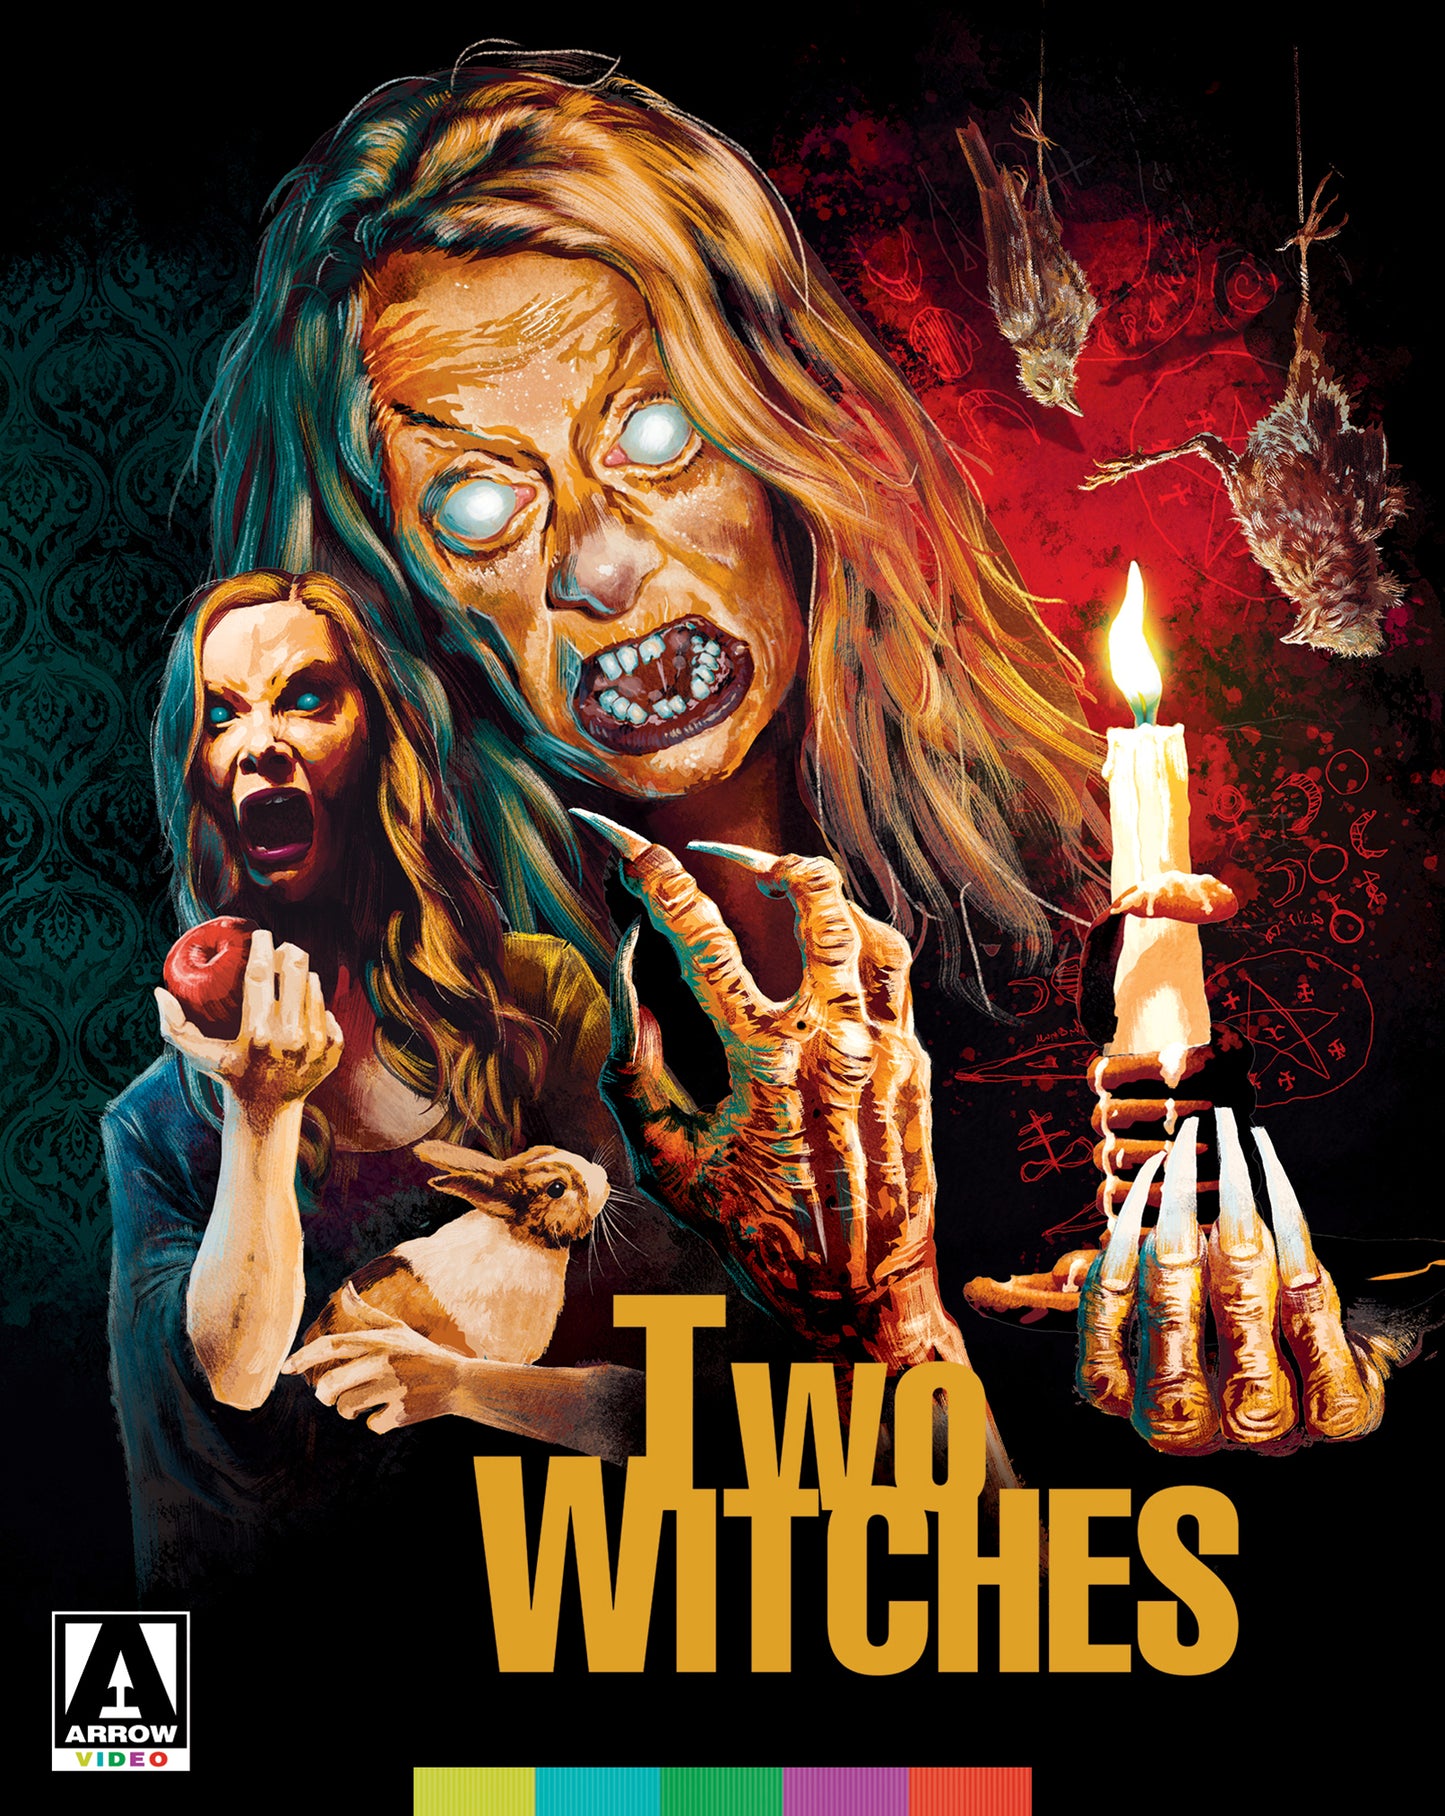 Two Witches Blu-ray with Slipcover (Arrow Video/U.S.)